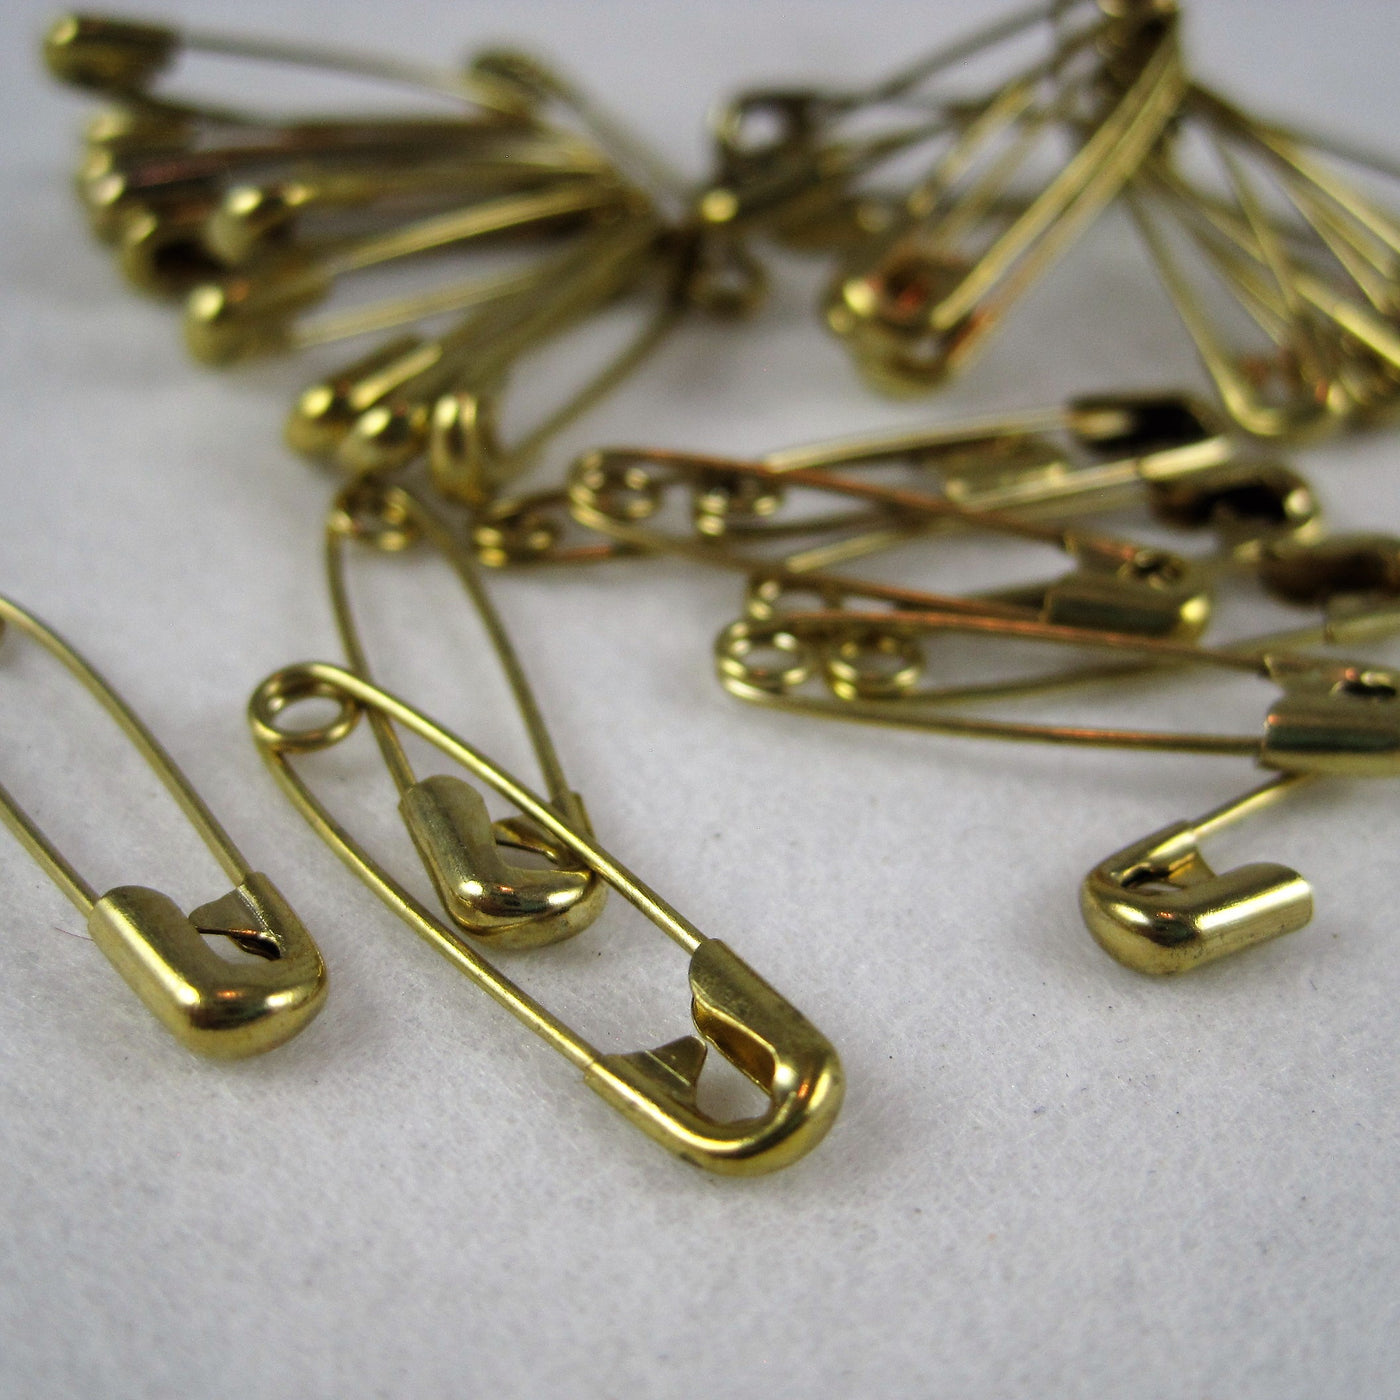 Small Gold Safety Pins — Simply Sewing, The Online Haberdashery Store